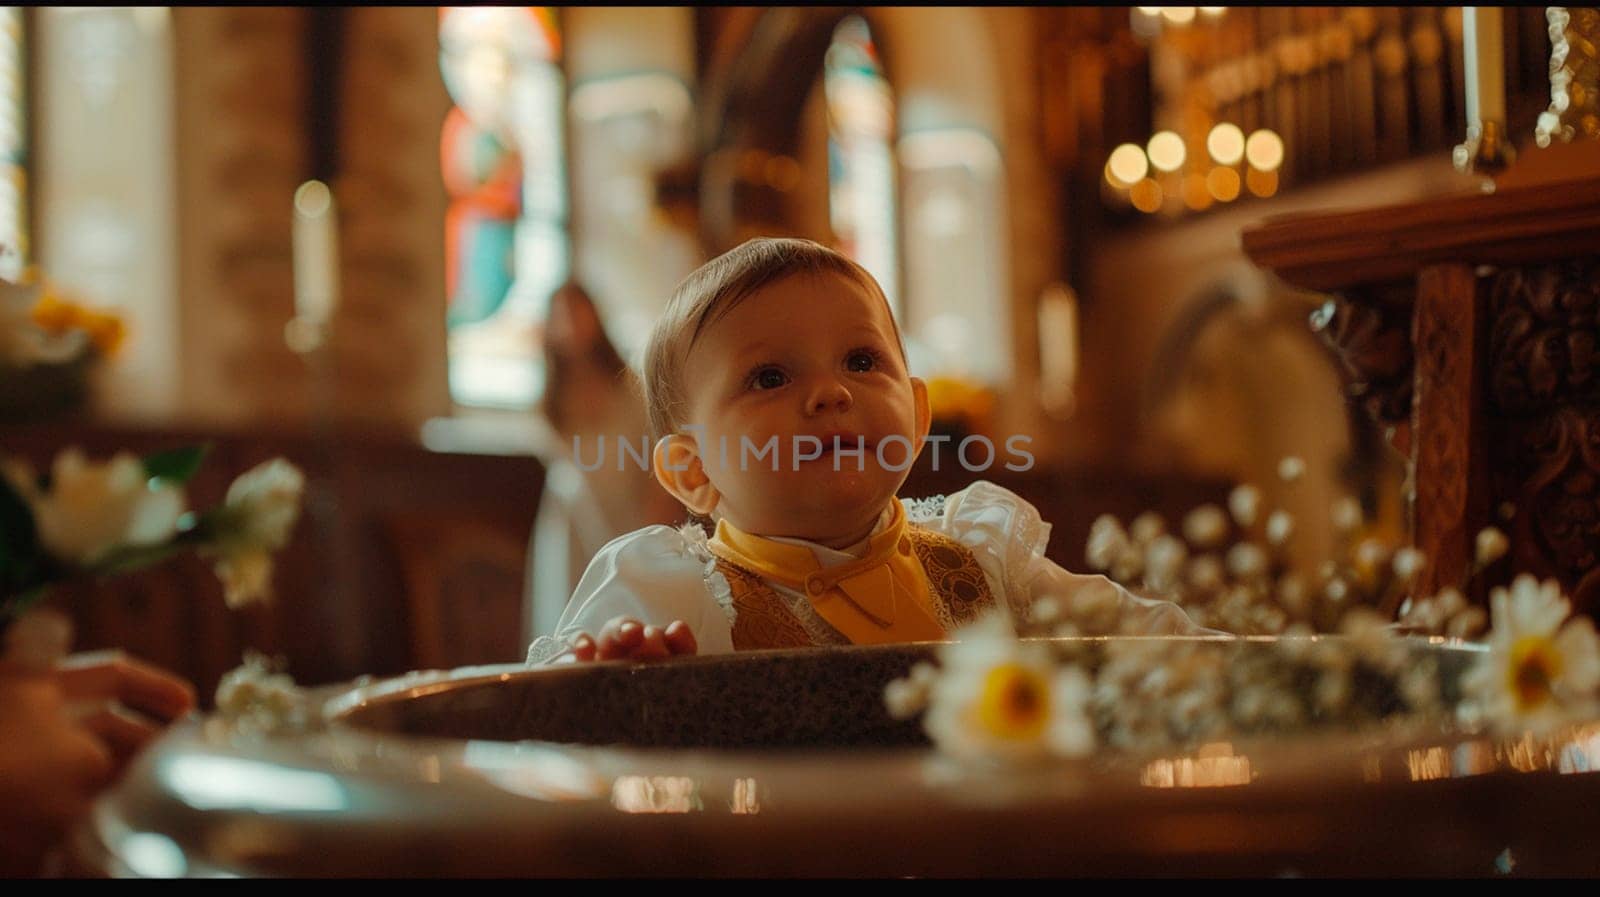 Baptism of a child in church. Selective focus. Kid.